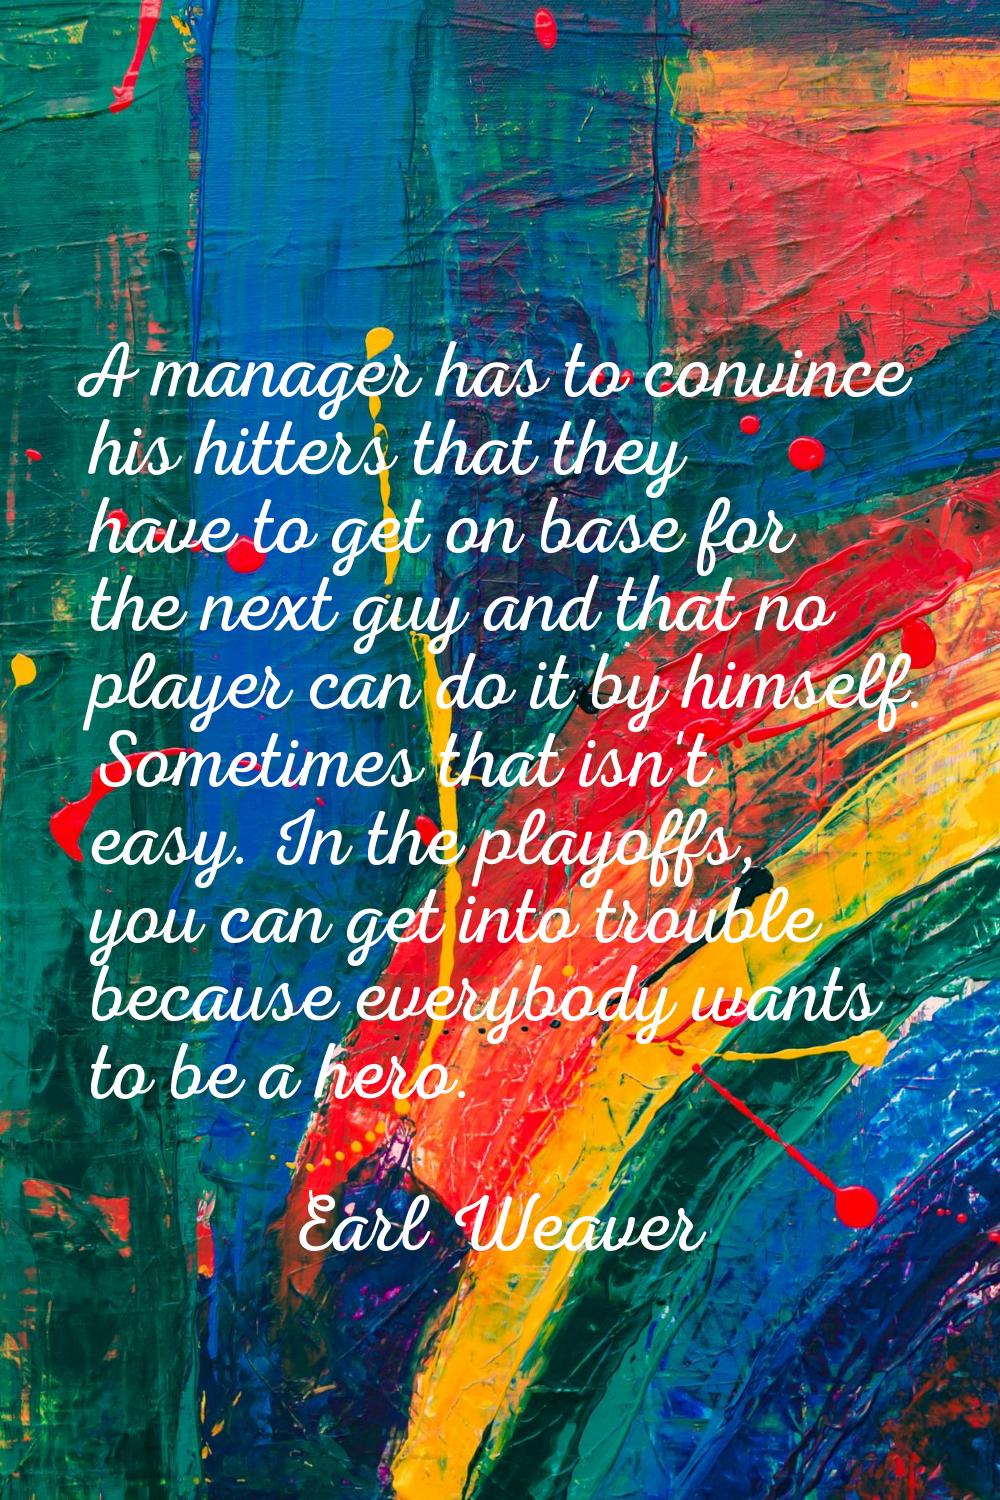 A manager has to convince his hitters that they have to get on base for the next guy and that no pl